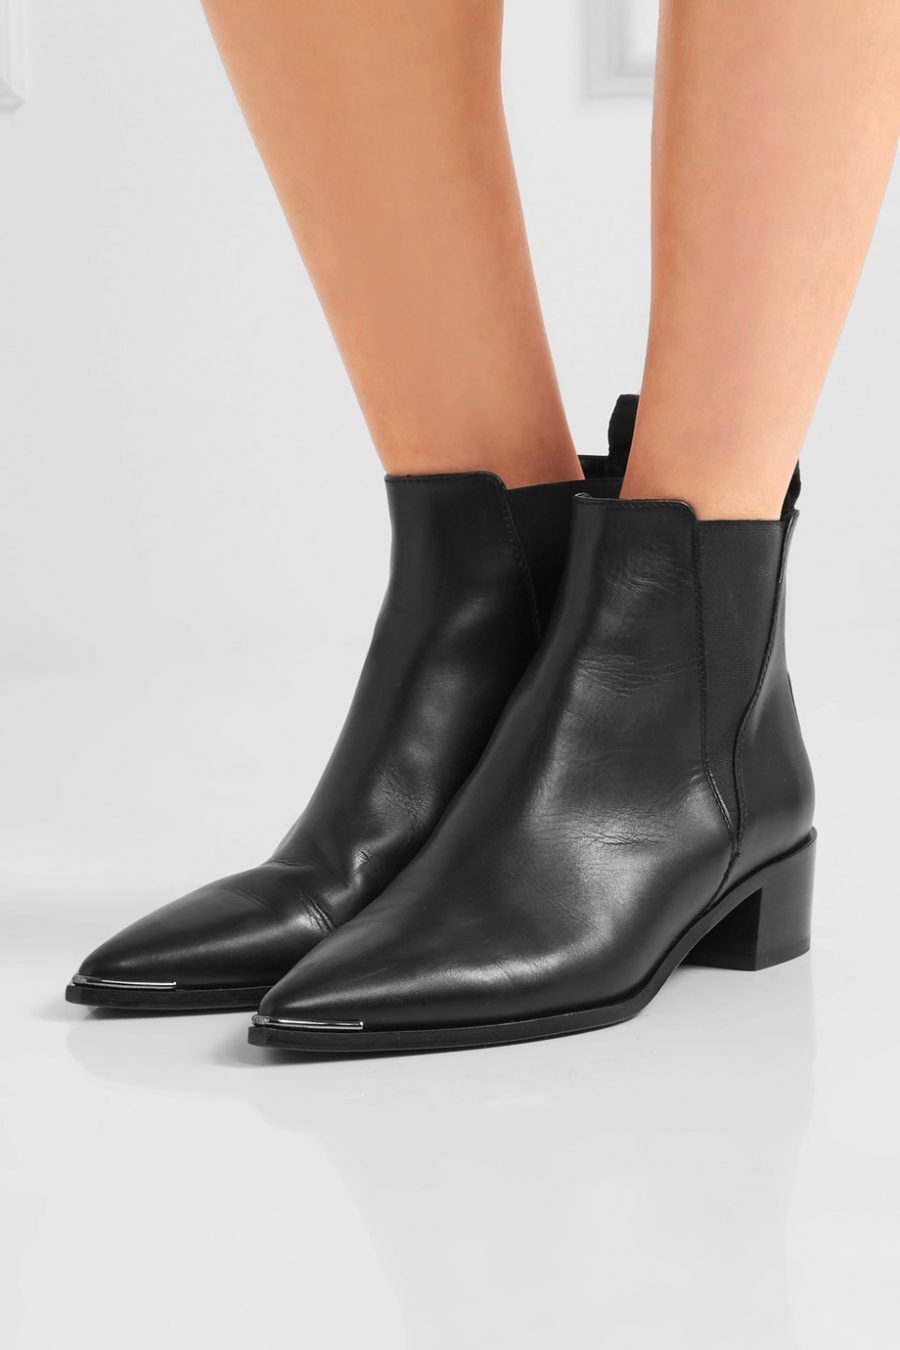 See Need Want Mothers Day Gift Guide Acne Studios Jensen Boots 1